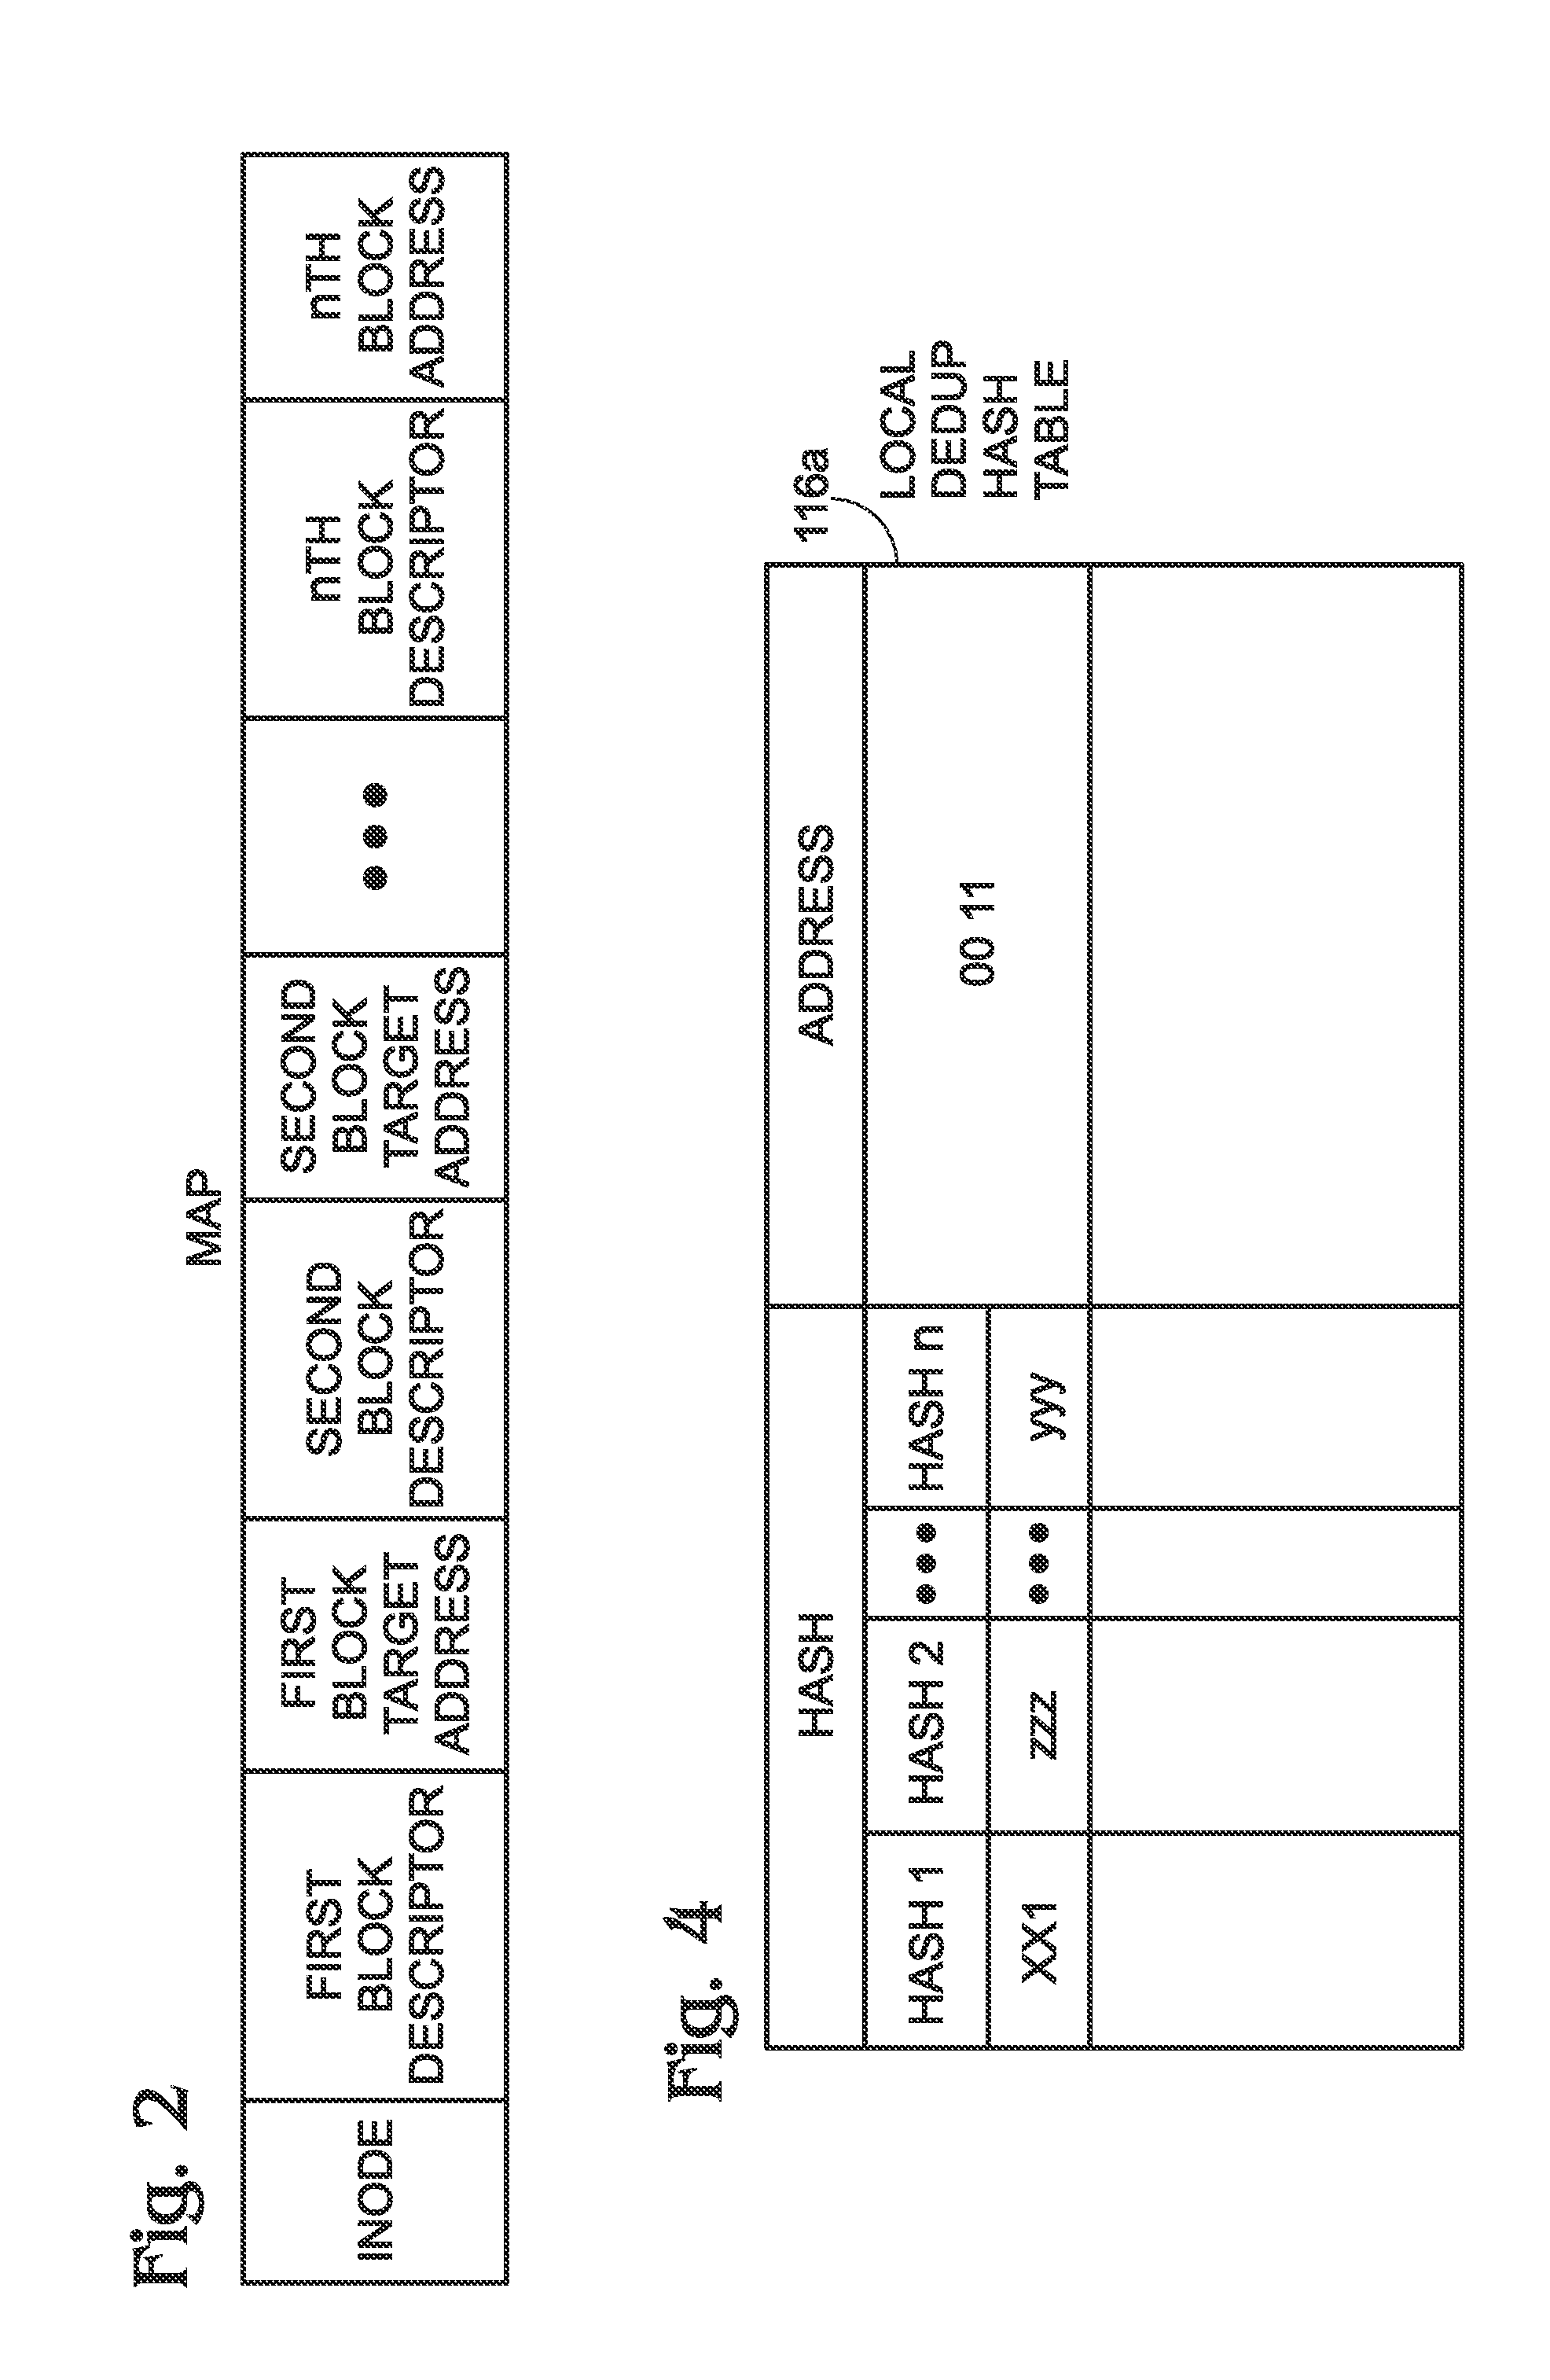 Distributed file system with client-side deduplication capacity